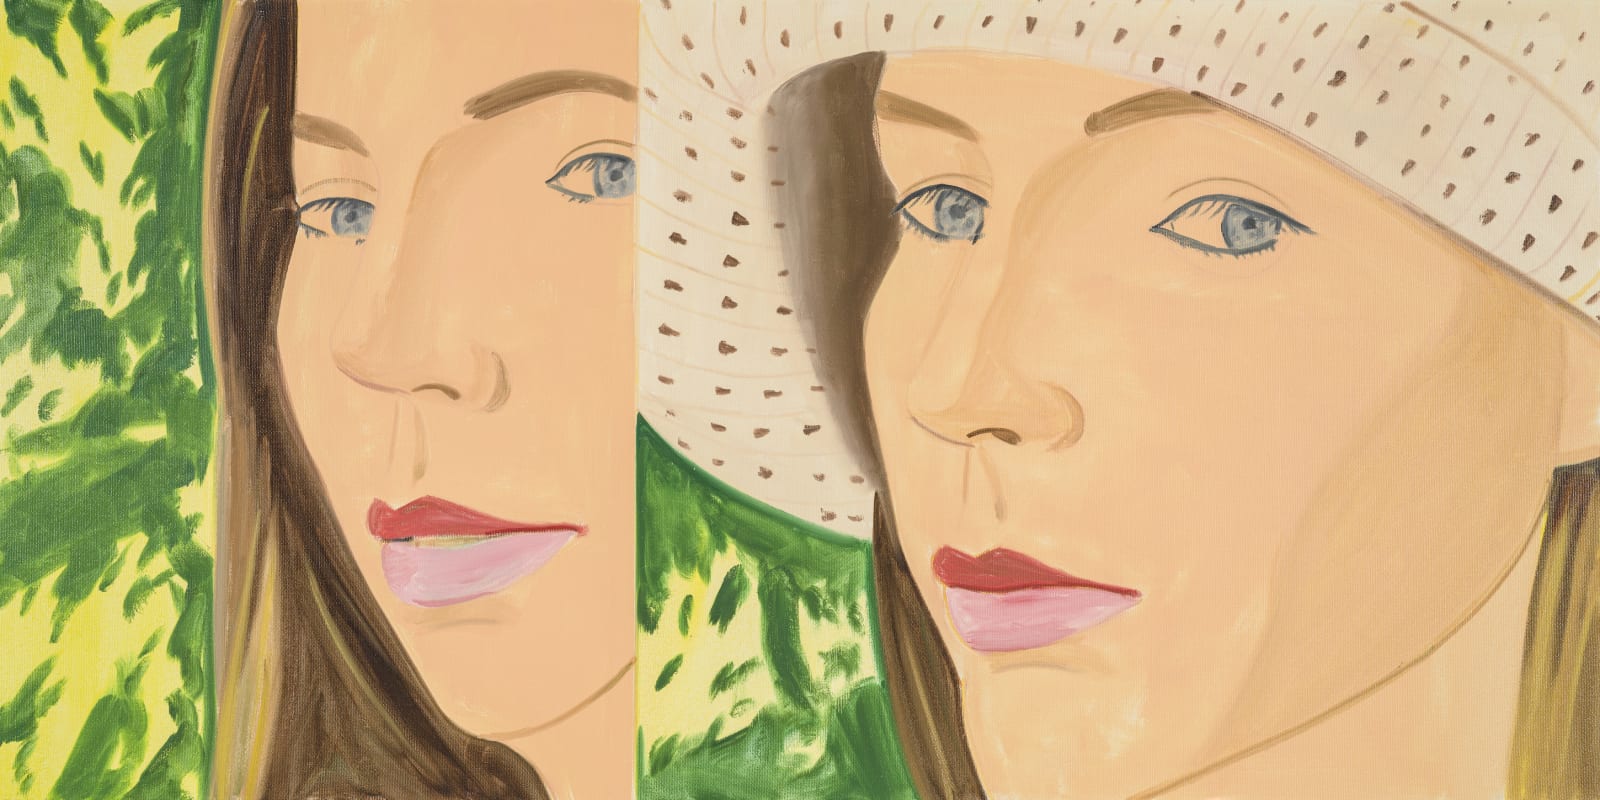 <a href="/content/feature/1602/detail/image28998/" class="pageload-link-type-popup-enabled-content"><div class="artist" style="text-align: center;"><span class="artist"><strong>Alex Katz</strong></span><i><br /></i></div><div class="artist" style="text-align: center;"><i>Straw Hat 2 </i>밀짚 모자 2</div><div class="artist" style="text-align: center;">2021</div><div class="medium" style="text-align: center;">Oil on linen</div><div class="dimensions"><p class="p1" style="text-align: center;">121.9 x 243.8 cm<br />(48 x 96 in)</p></div></a>